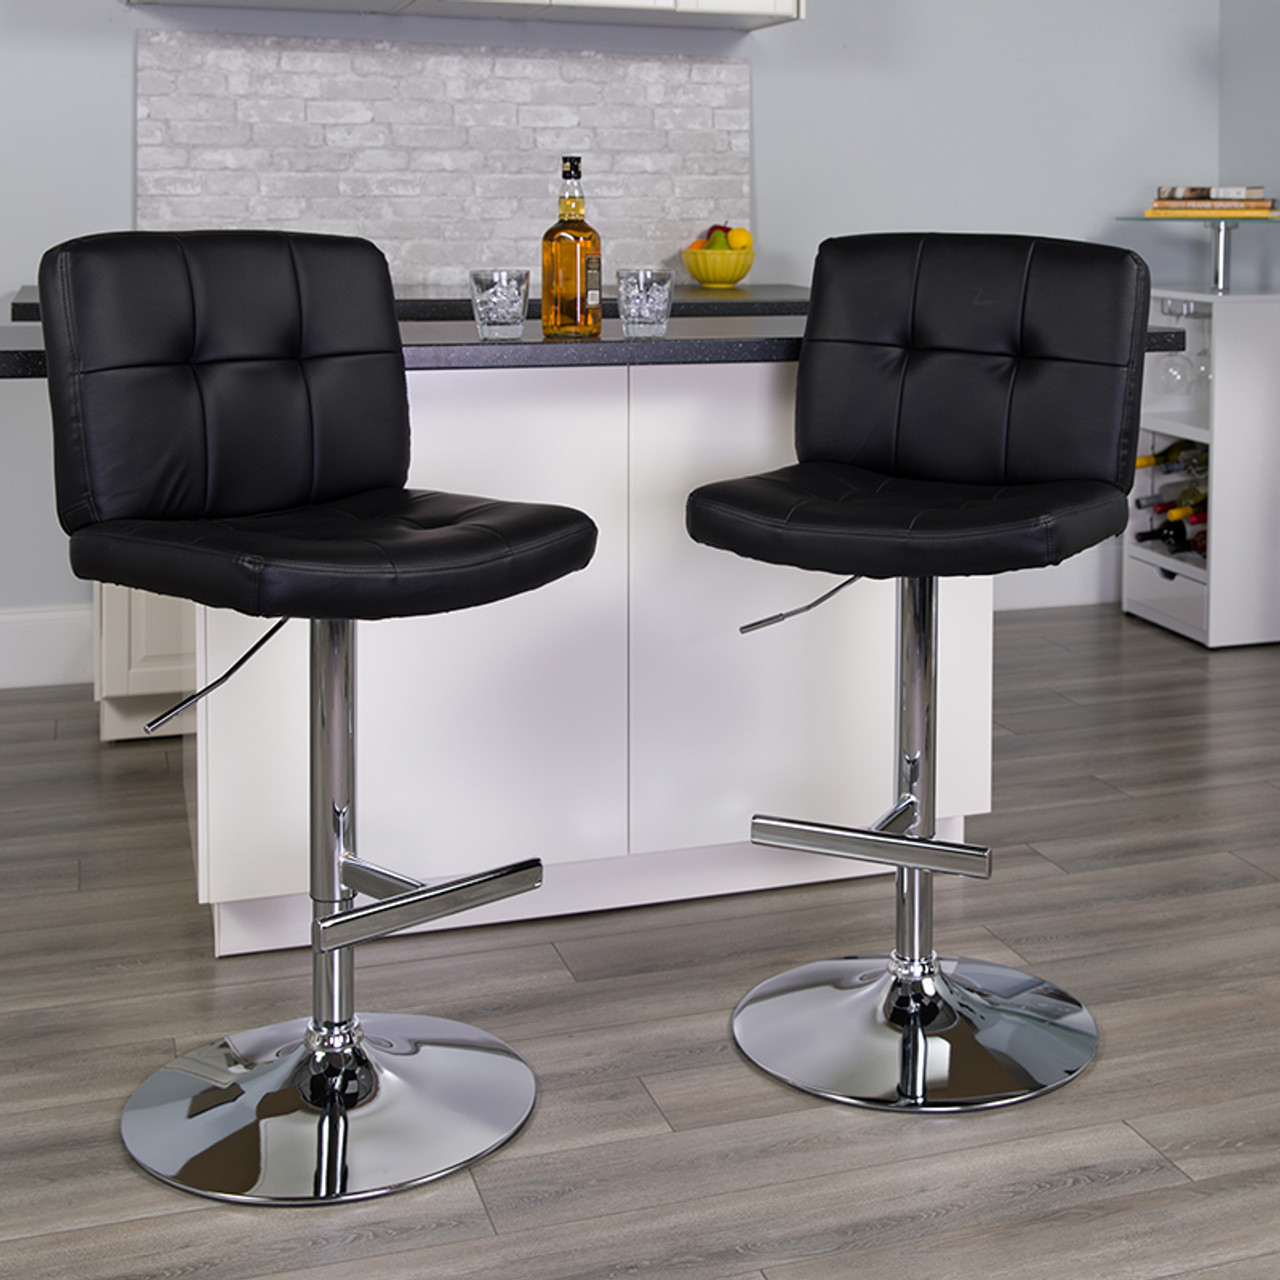 Contemporary Black Vinyl Adjustable Height Barstool With Chrome Base 